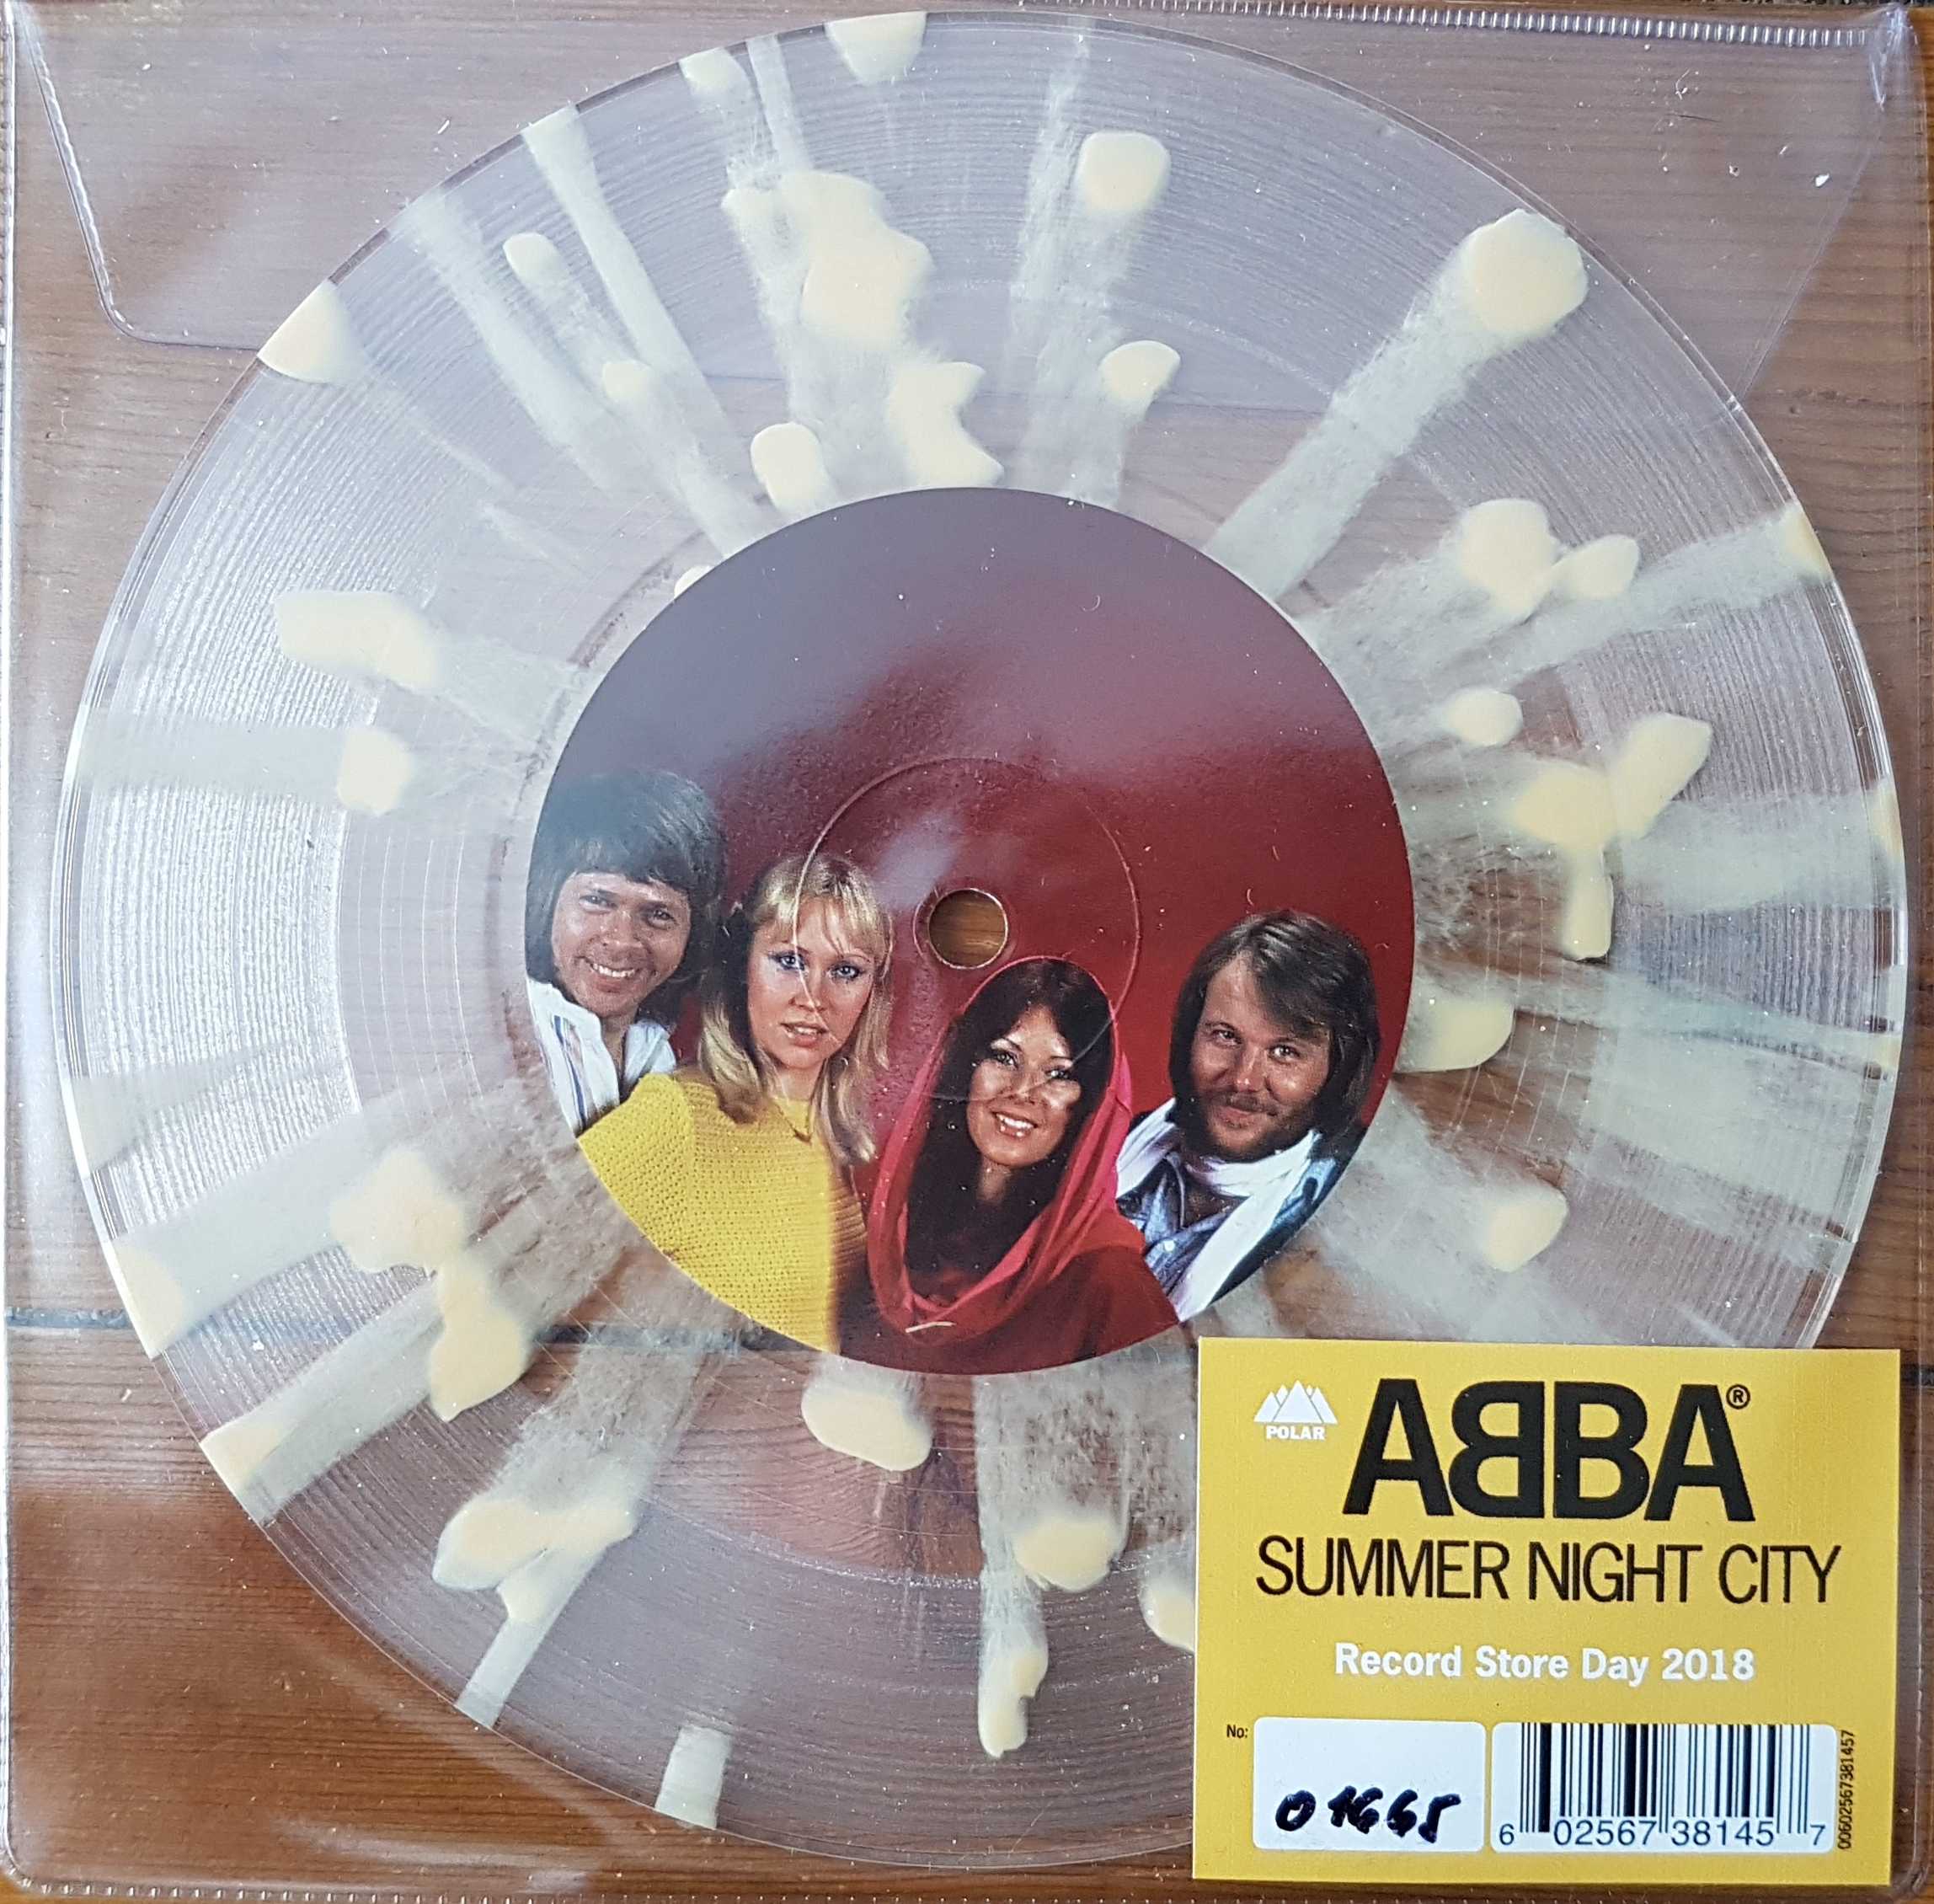 Picture of Summer night city - Record Store Day 2018 by artist Abba  